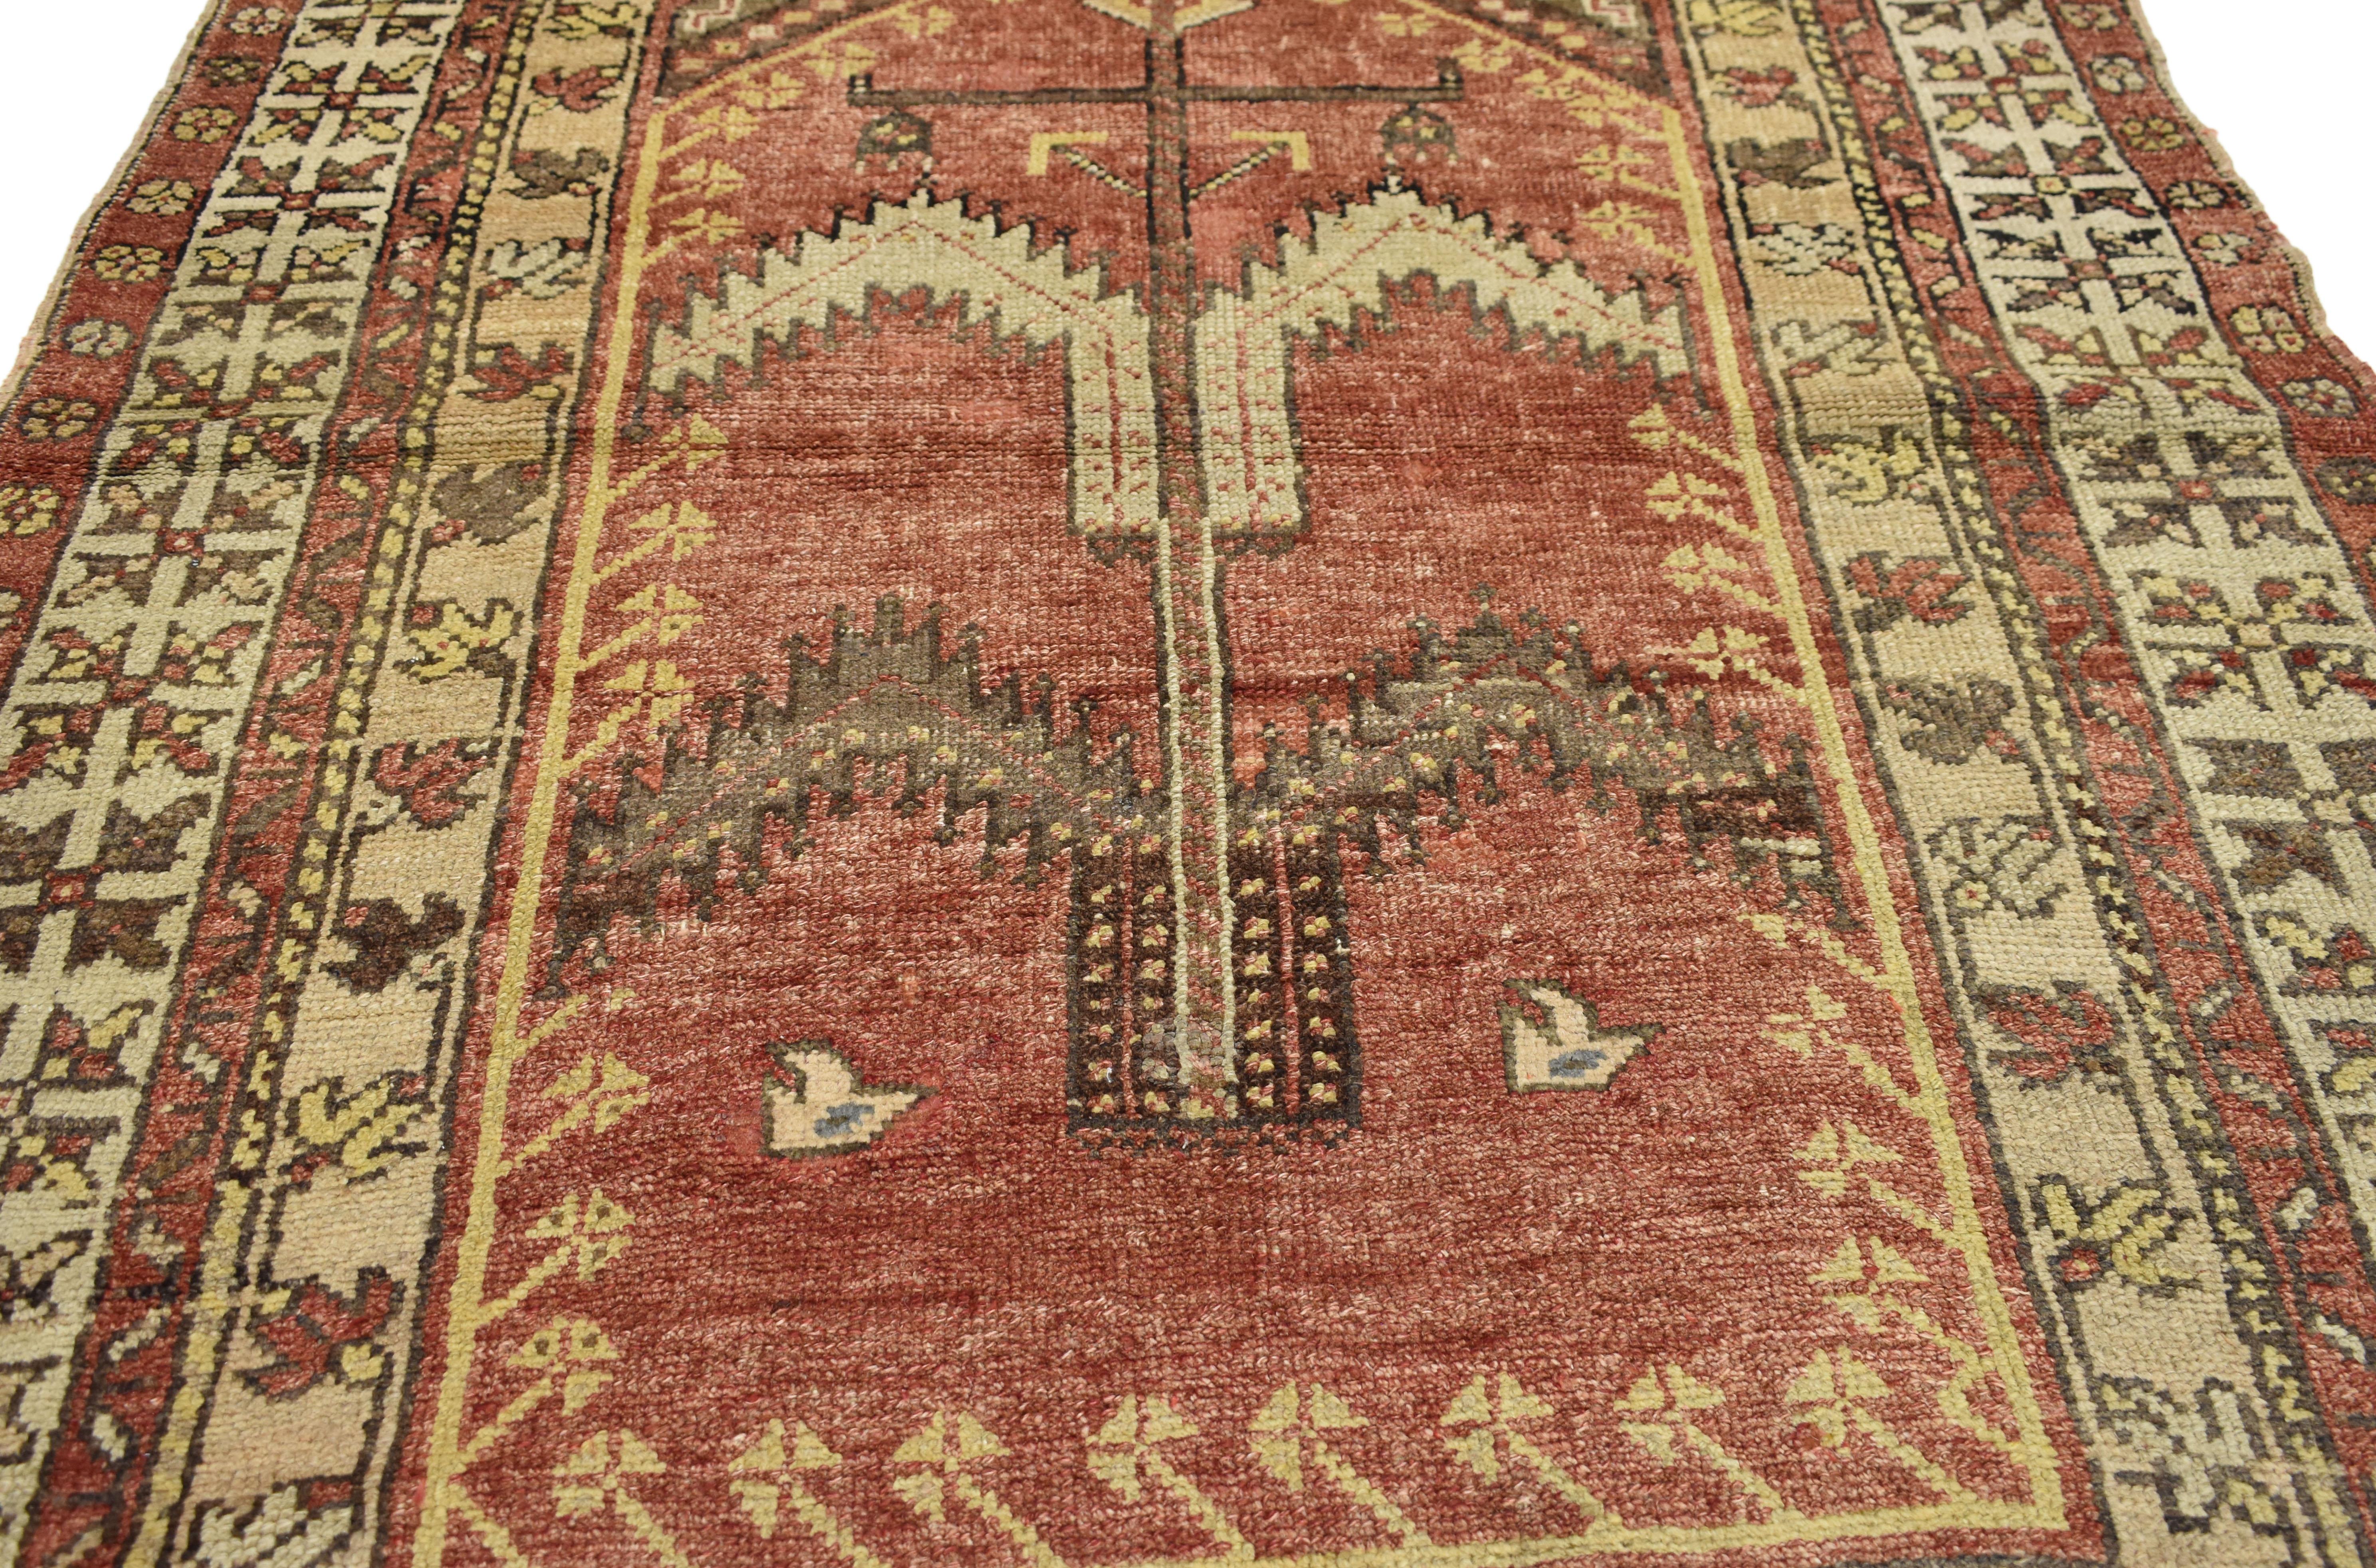 73941, vintage Turkish Oushak rug with modern tribal style, Turkish prayer rug. An elaborate Turkish design and modern tribal style creates a mesmerizing sense of well-balanced proportions in this hand-knotted wool vintage Turkish Oushak prayer rug.